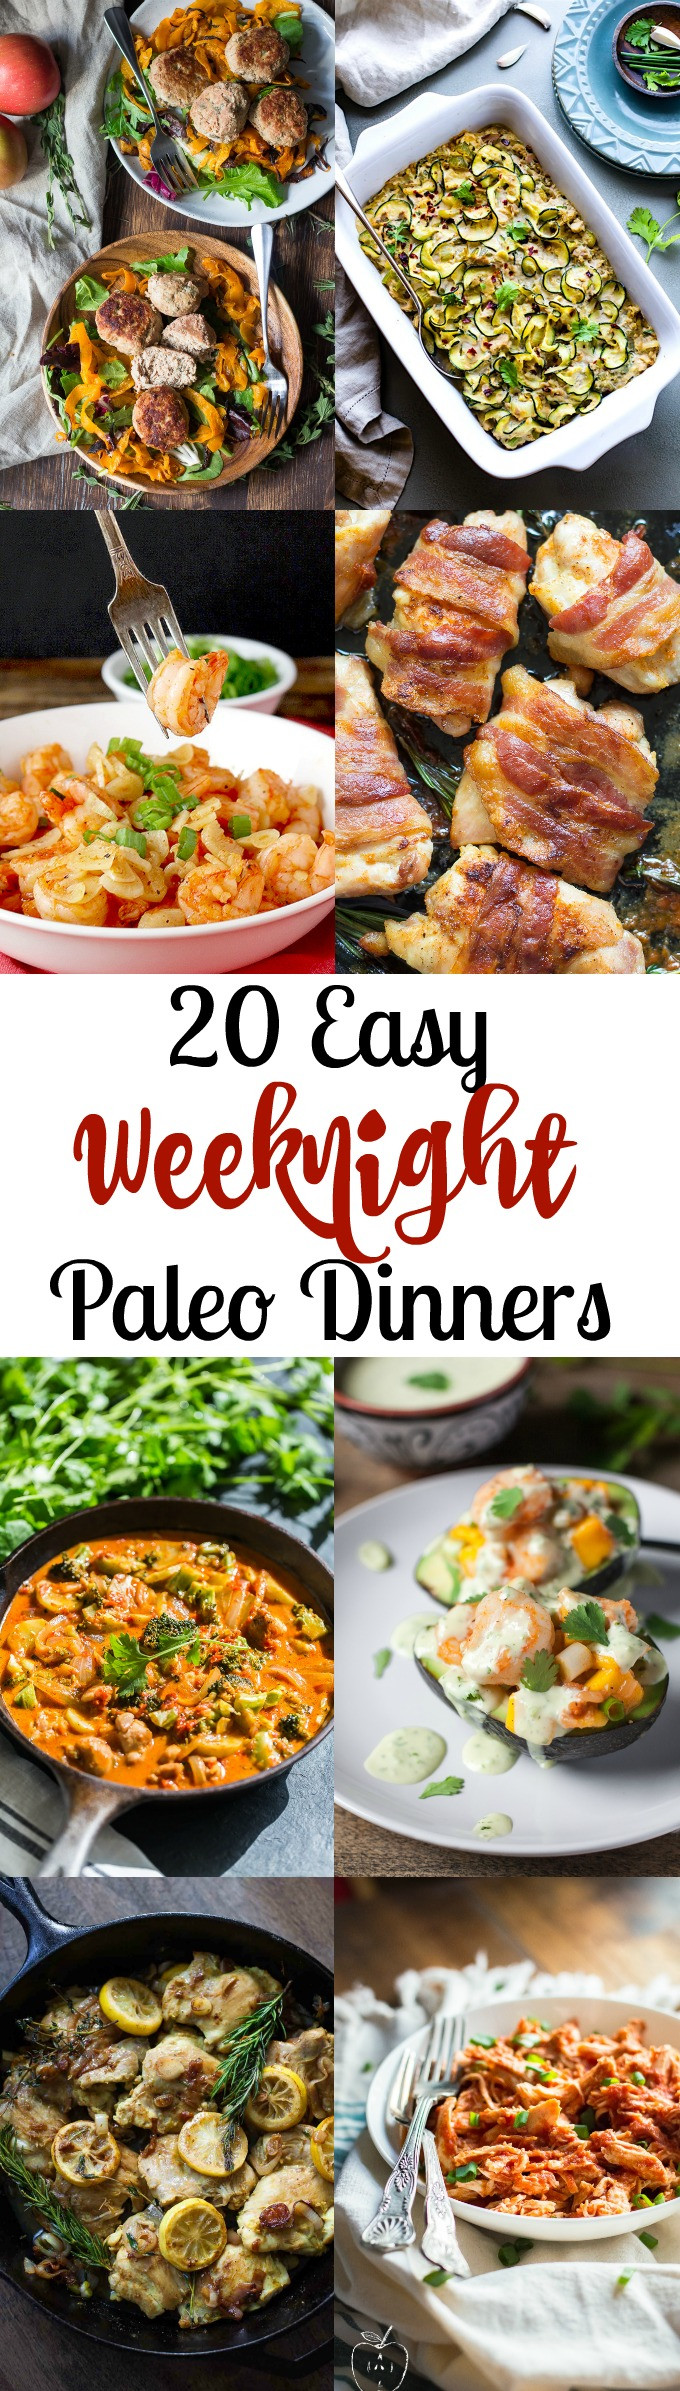 Easy Paleo Recipes For Kids
 20 Easy Paleo Dinners for Weeknights